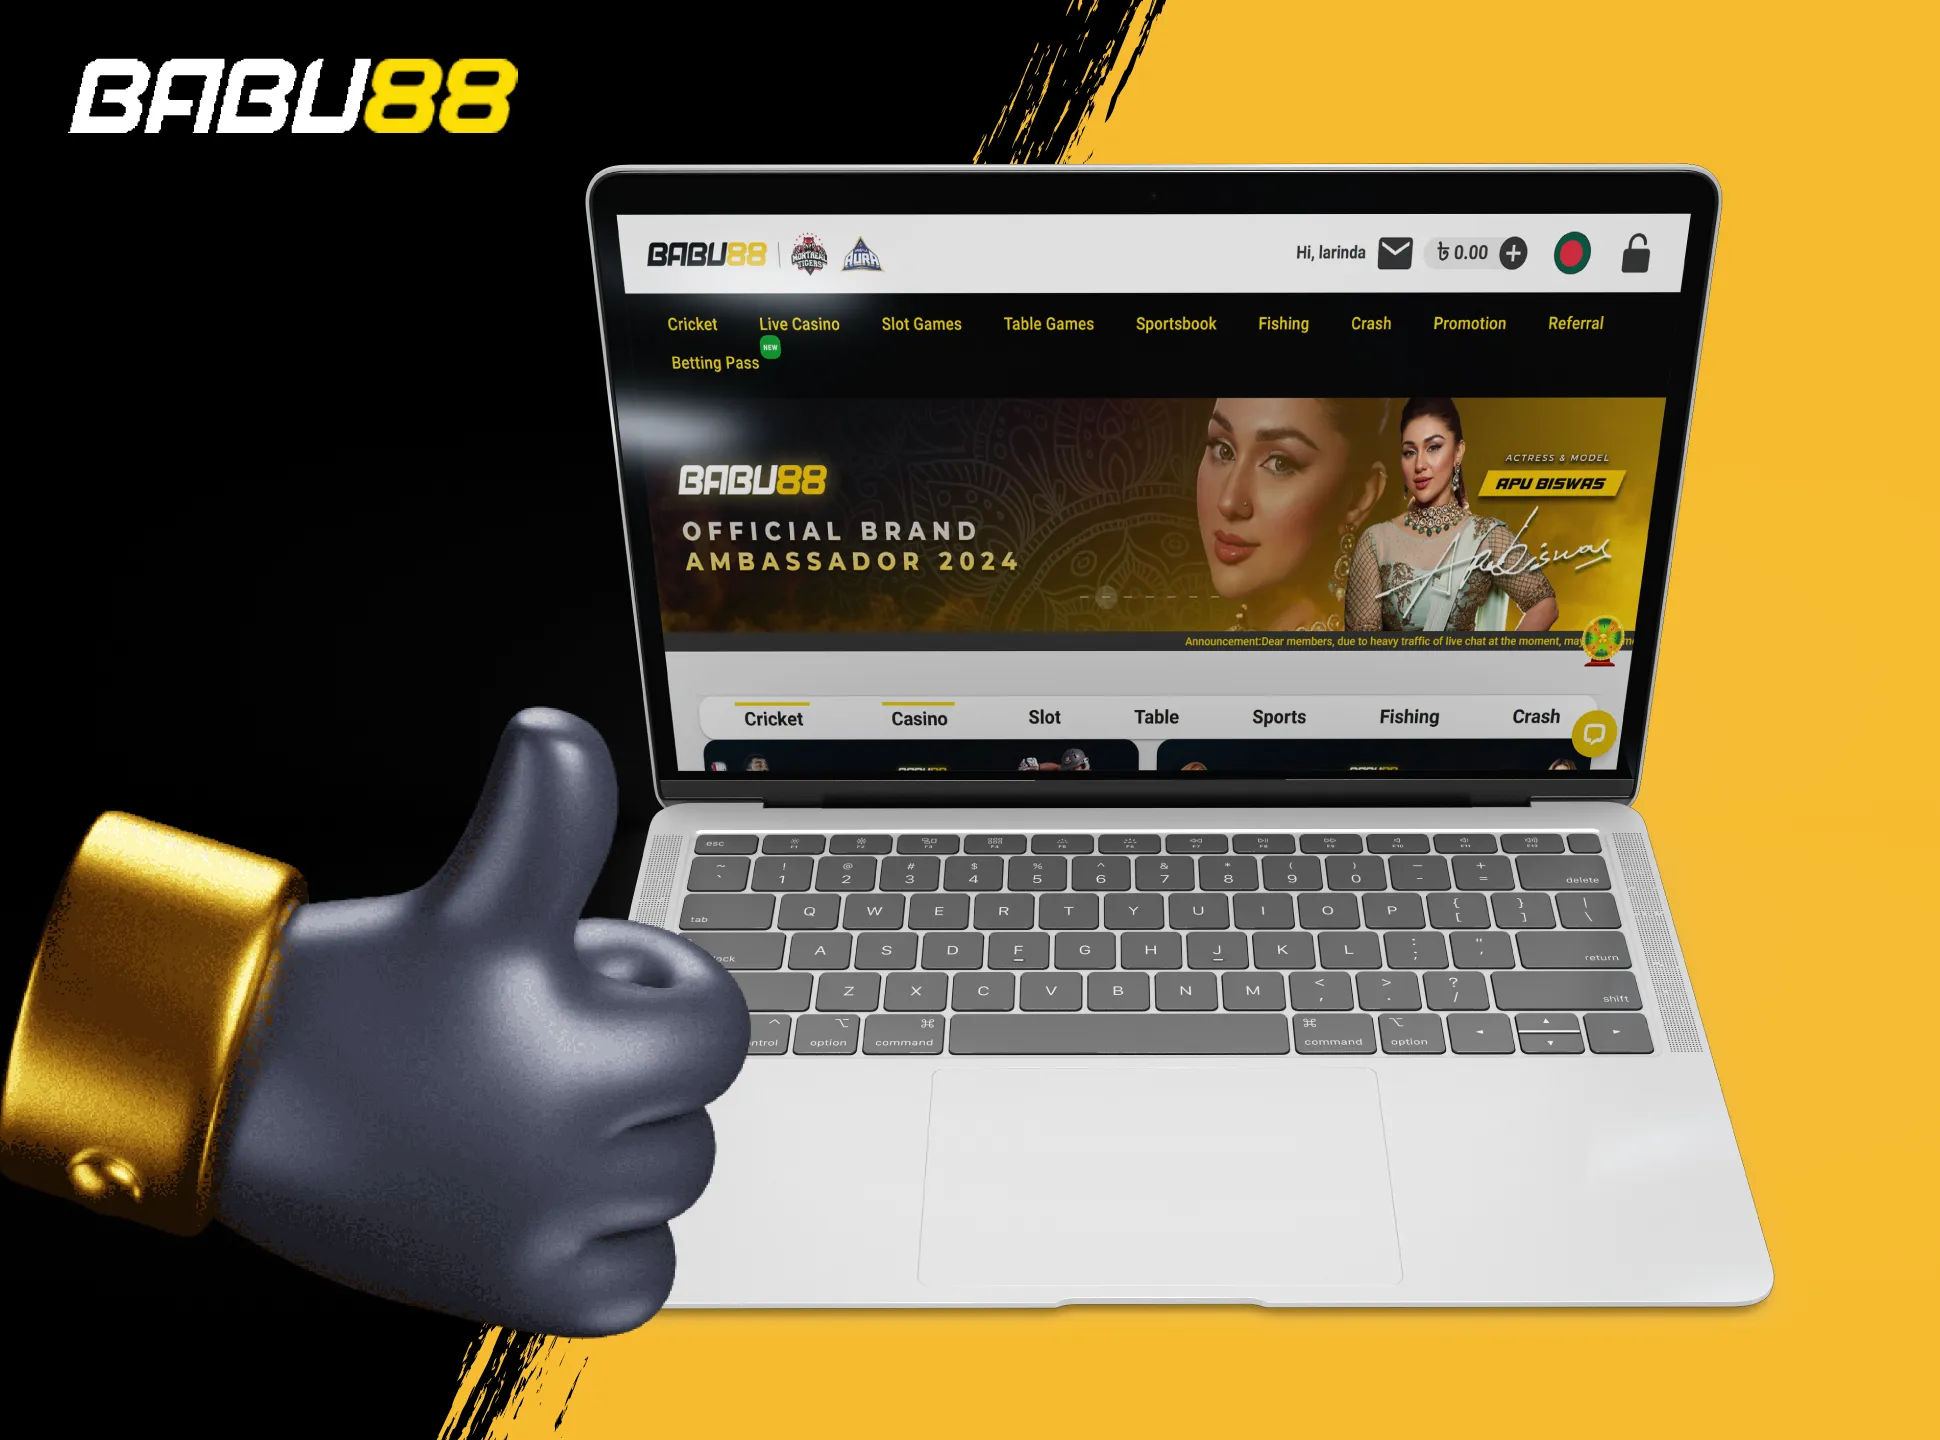 Sign up for Babu88 and download its app to place bets whenever you want.